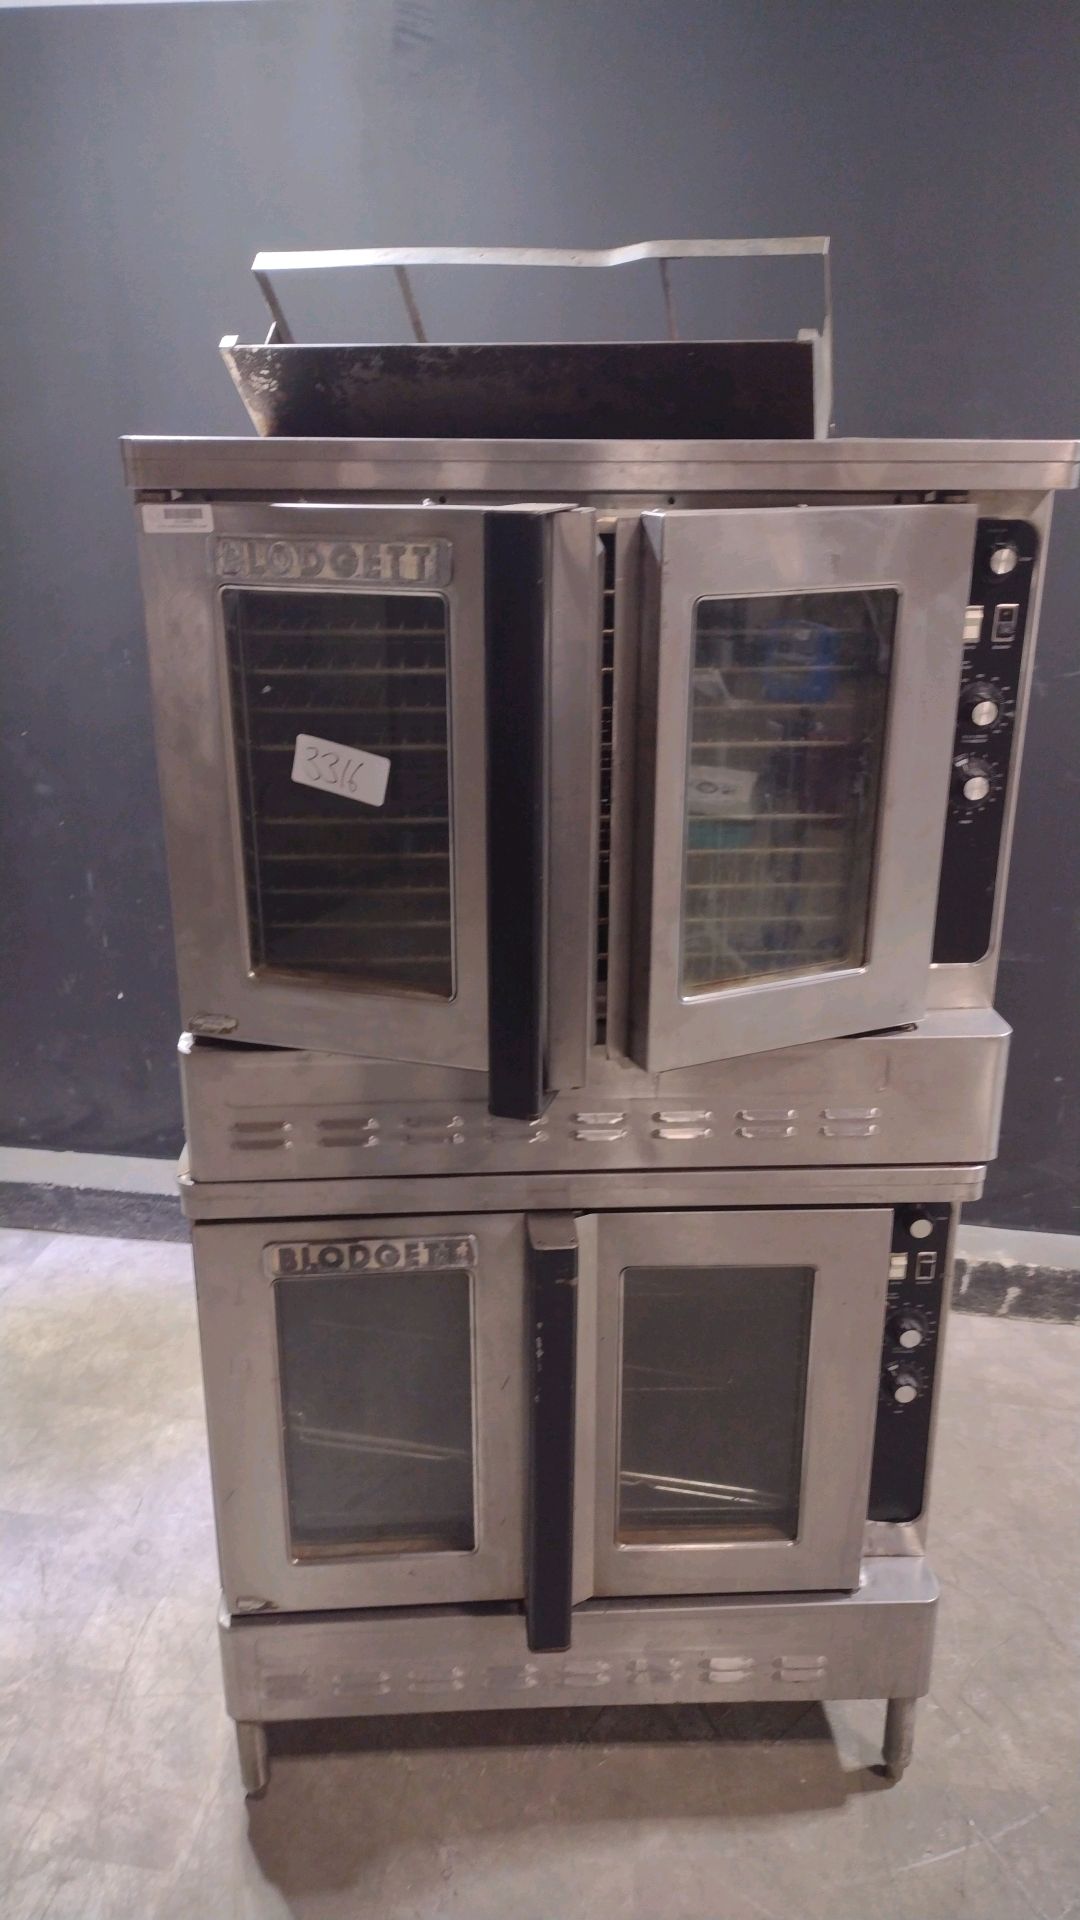 BLODGETT DOUBLE FULL SIZE CONVECTION OVEN (LOCATED AT 2440 GREENLEAF AVE, ELK GROVE VILLAGE, IL 600 - Bild 2 aus 3